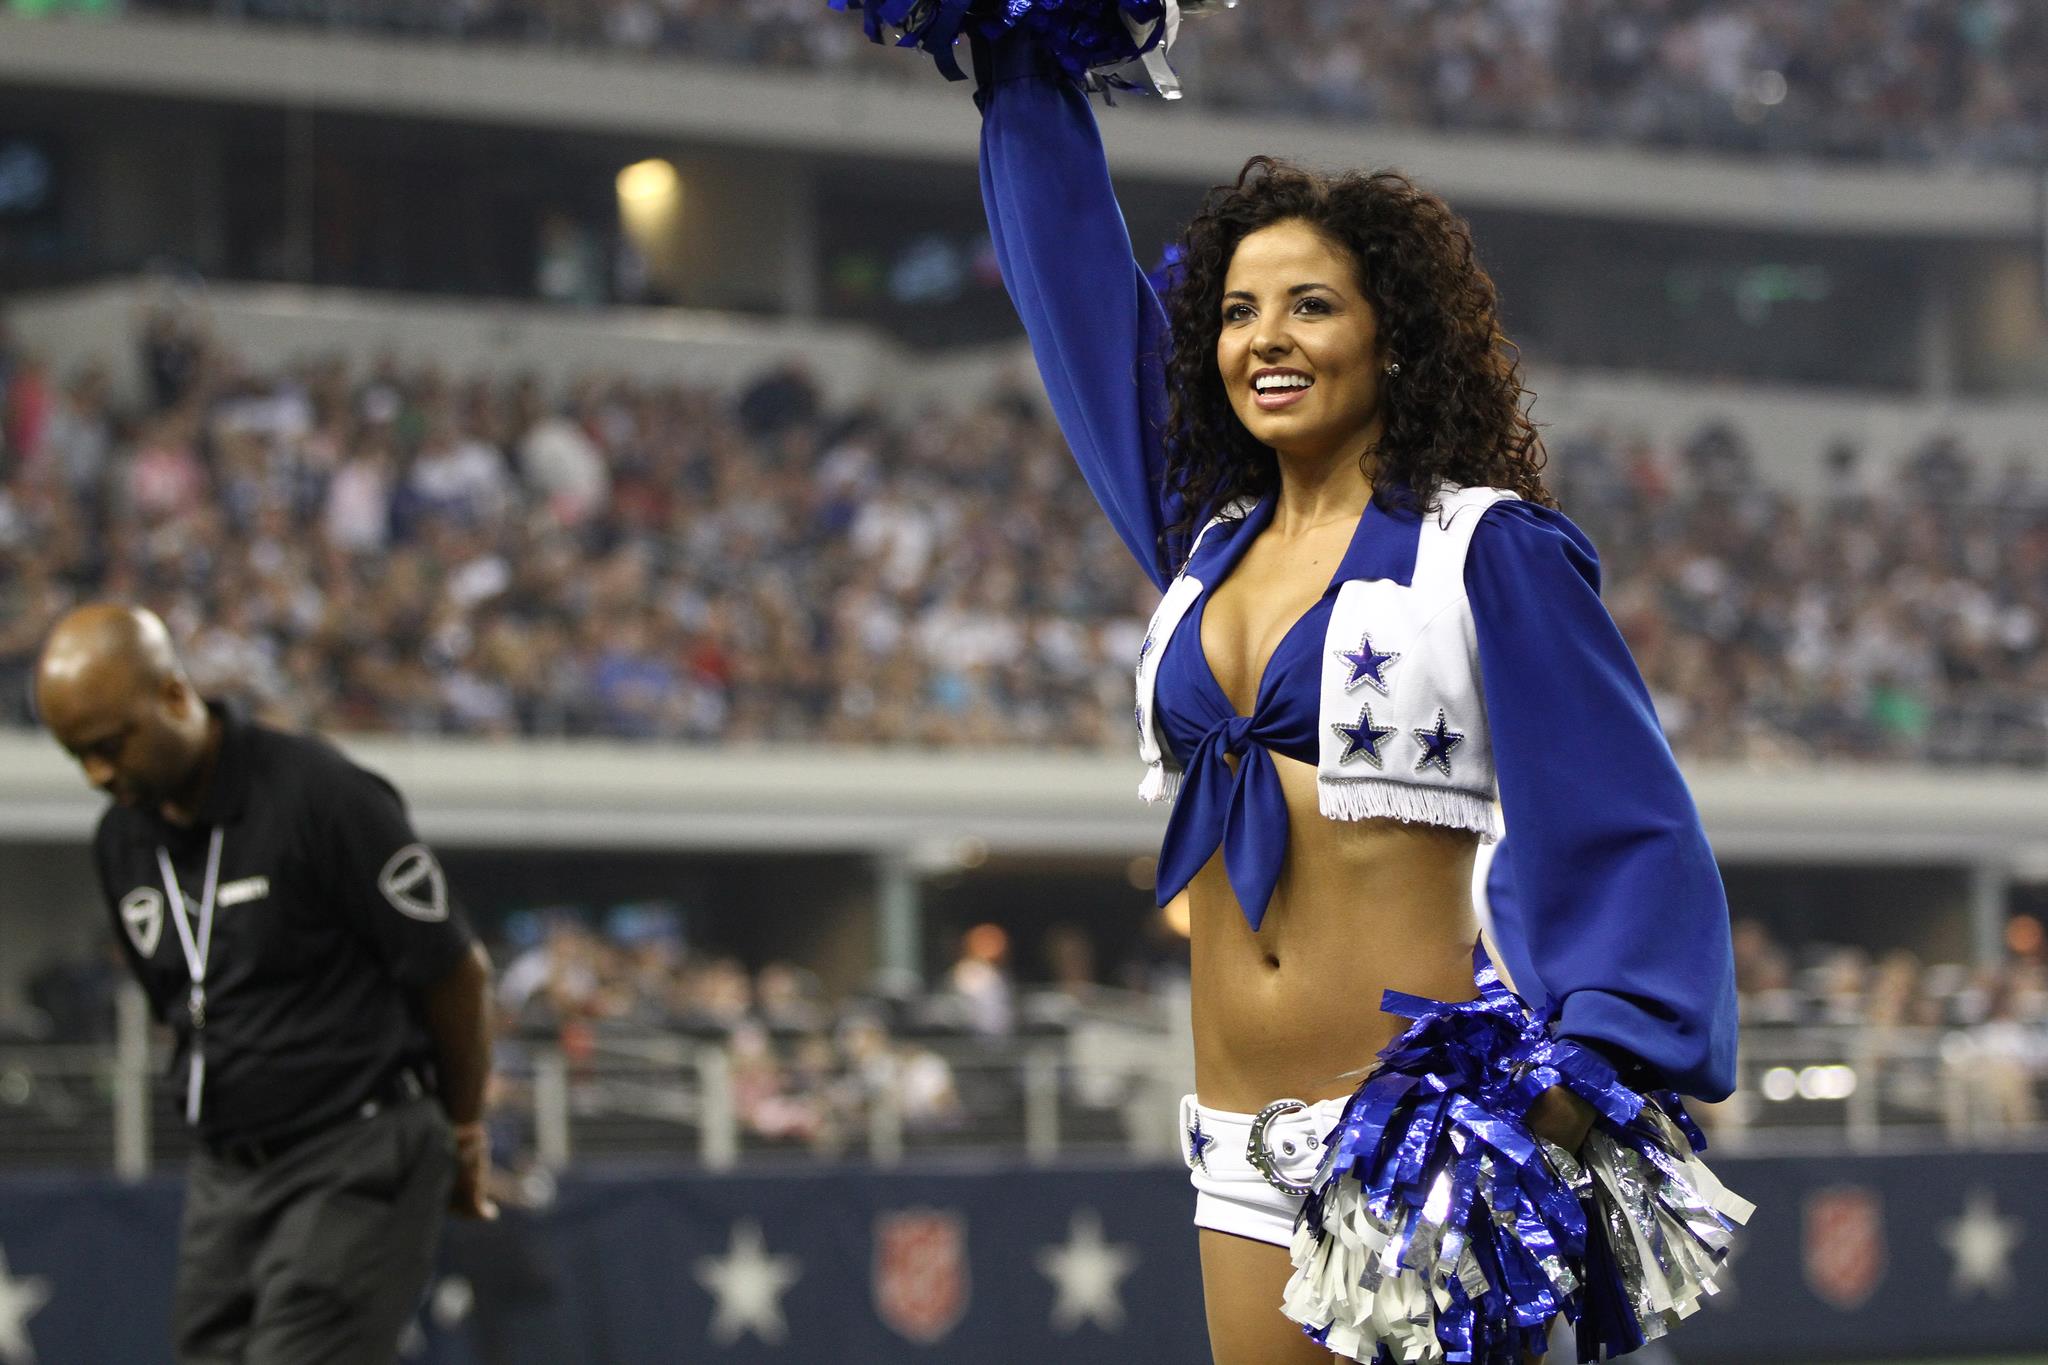 Sports Cheerleaders Porn - Good Job, Dallas Cowboys Cheerleaders, Guys Whacking It To Porn Like You  The Most â€“ UPROXX